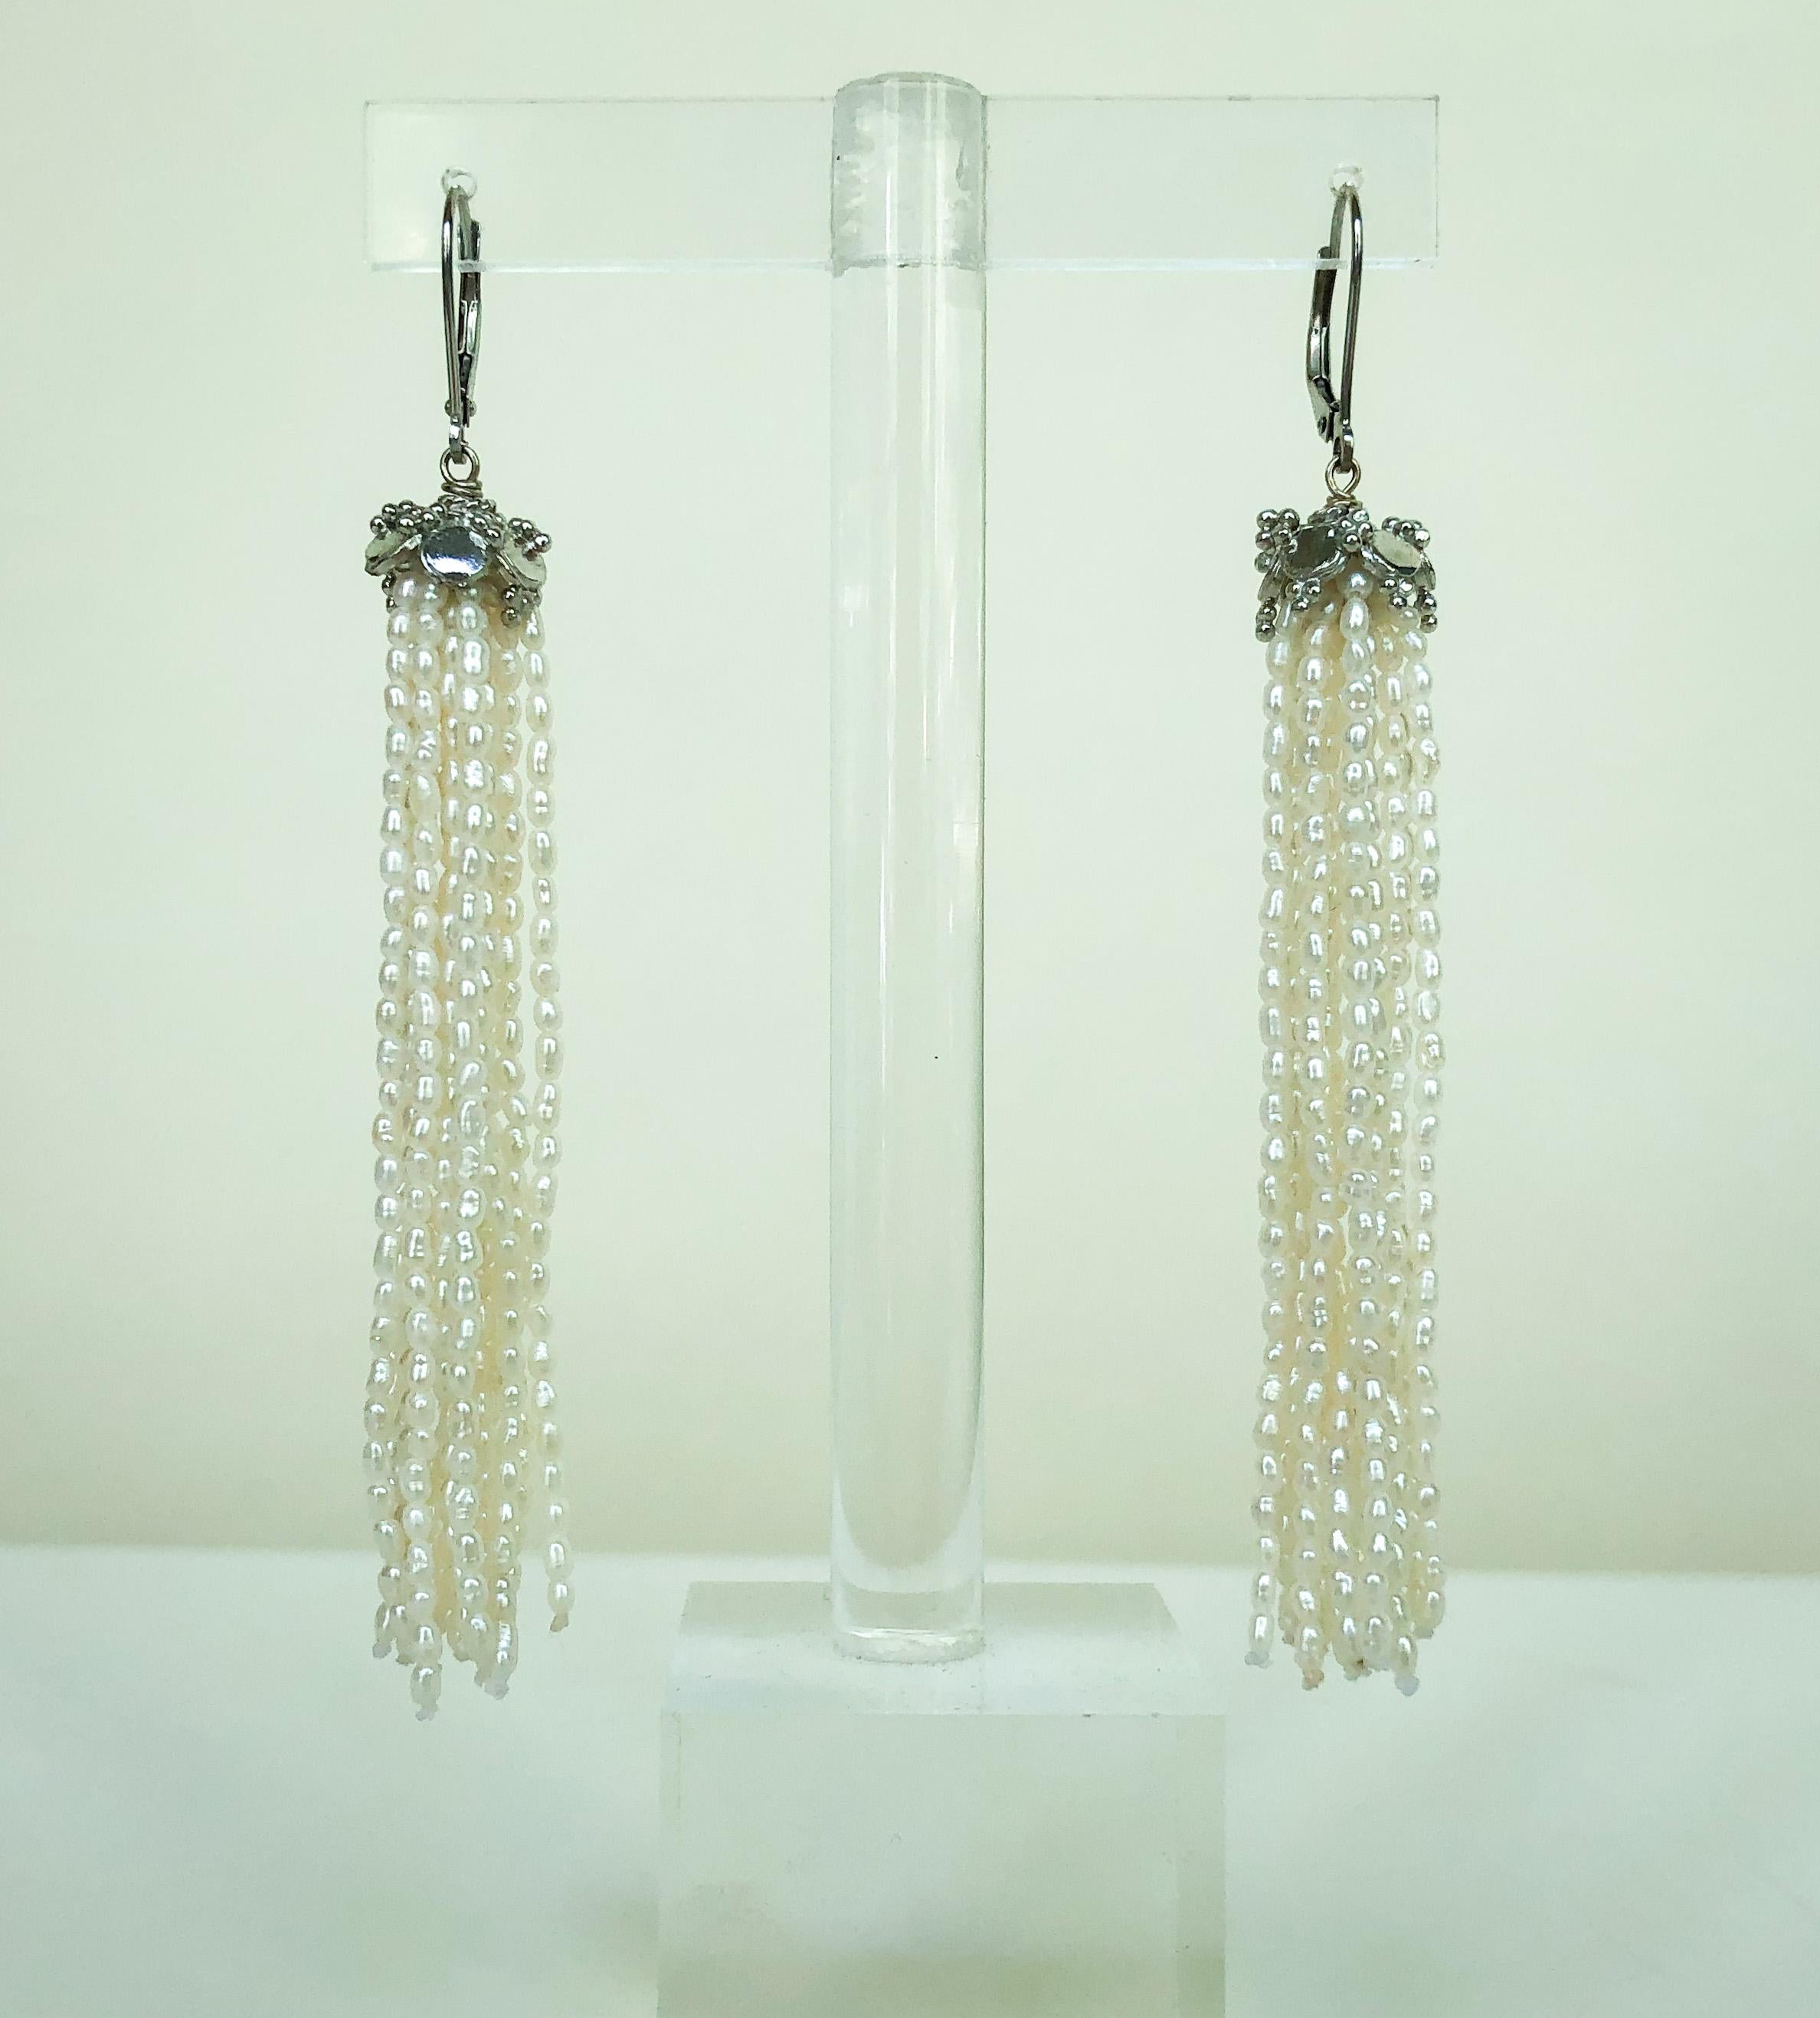 These white rice pearl tassel earrings with 14k white gold lever-backs with a silver rhodium-plated cup are lush and elegant. Flowing out of the roundel are strands of beautiful white rice pearls. At almost 3.5 inches inches, these earrings are